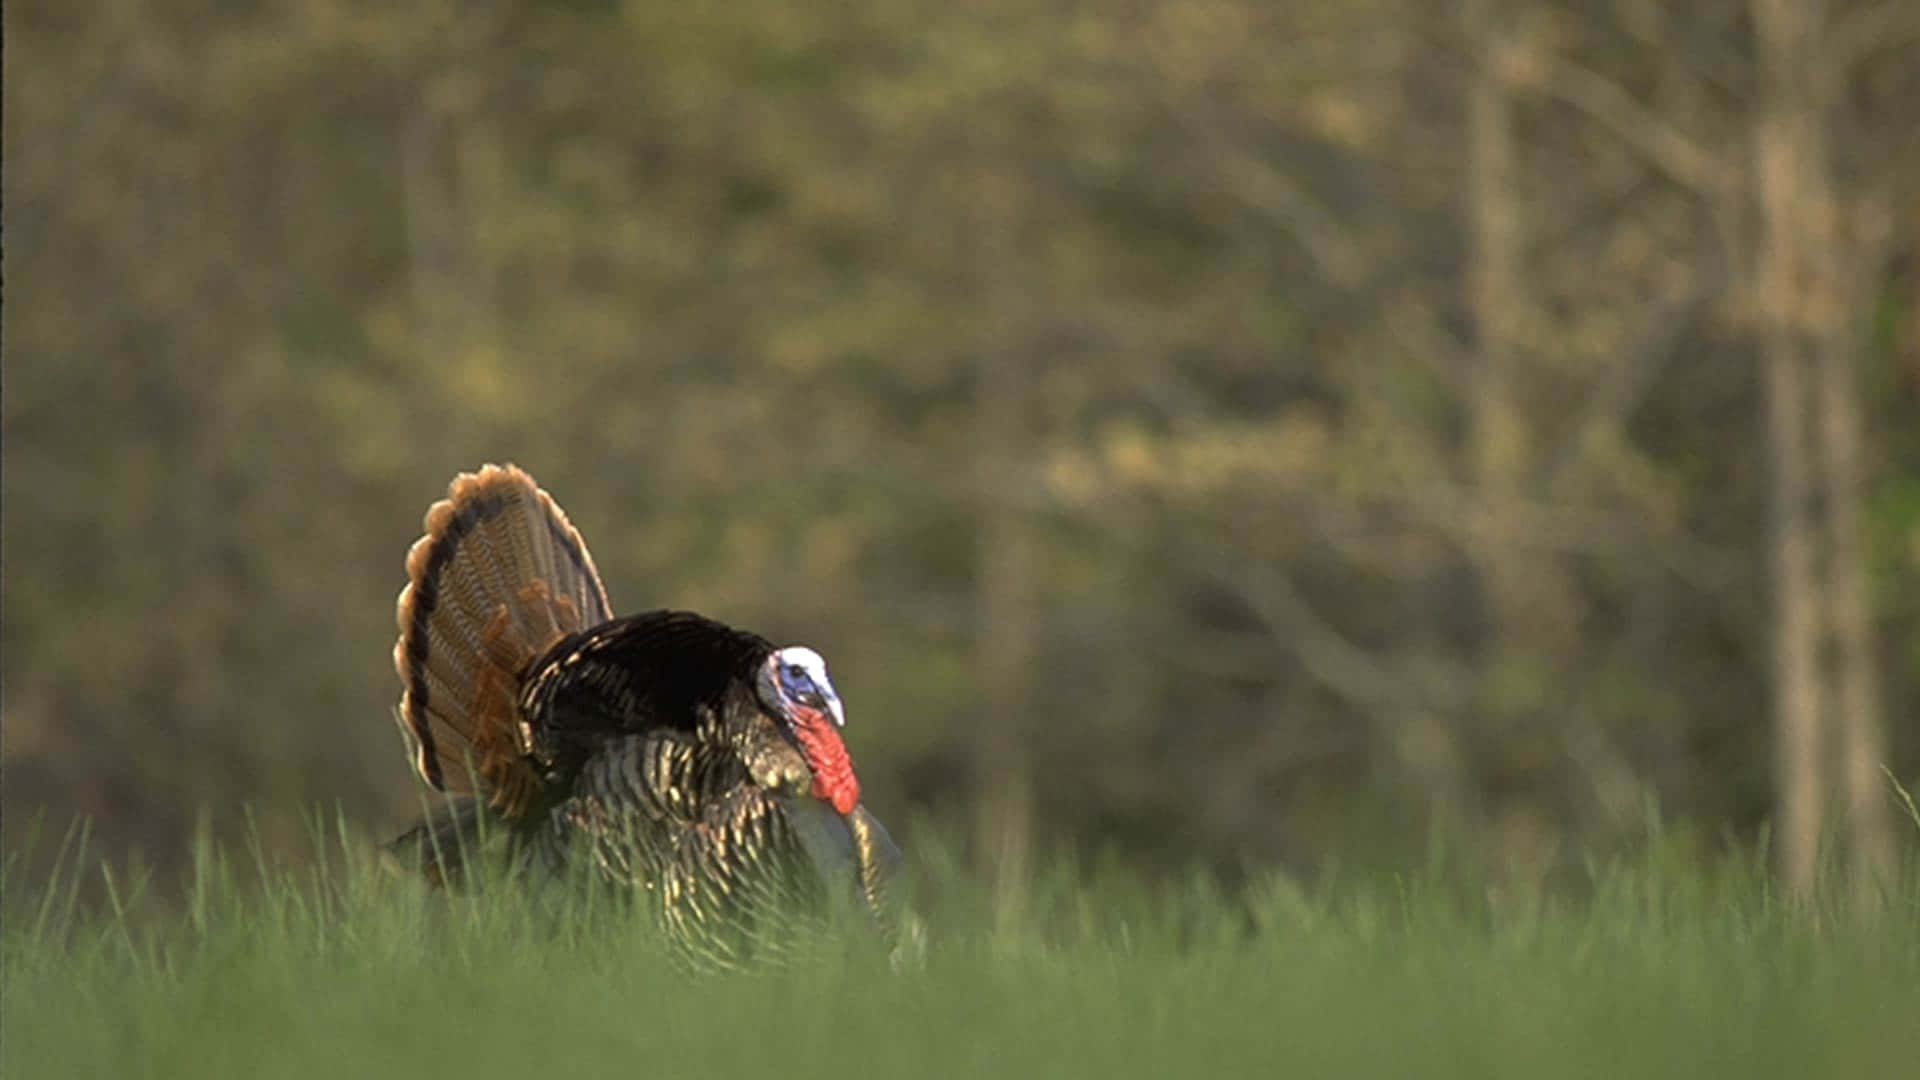 A Turkey Is Standing In The Grass